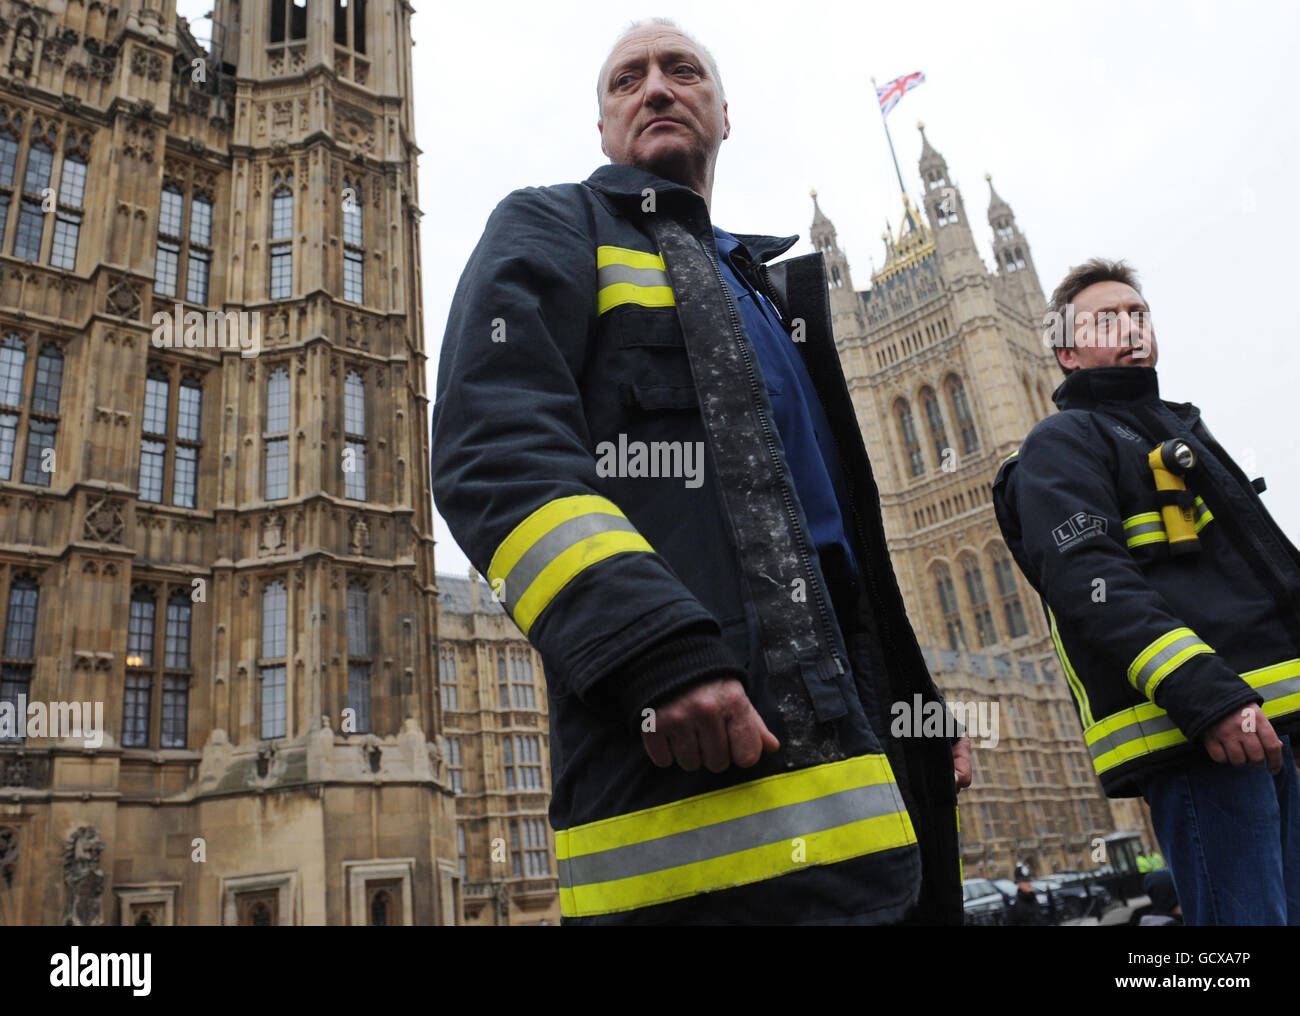 Firefighters demonstrate outside Parliament in London to lobby MPs as part of a campaign to protect pay, pensions and conditions, pledging the 'fight of our lives'. Stock Photo